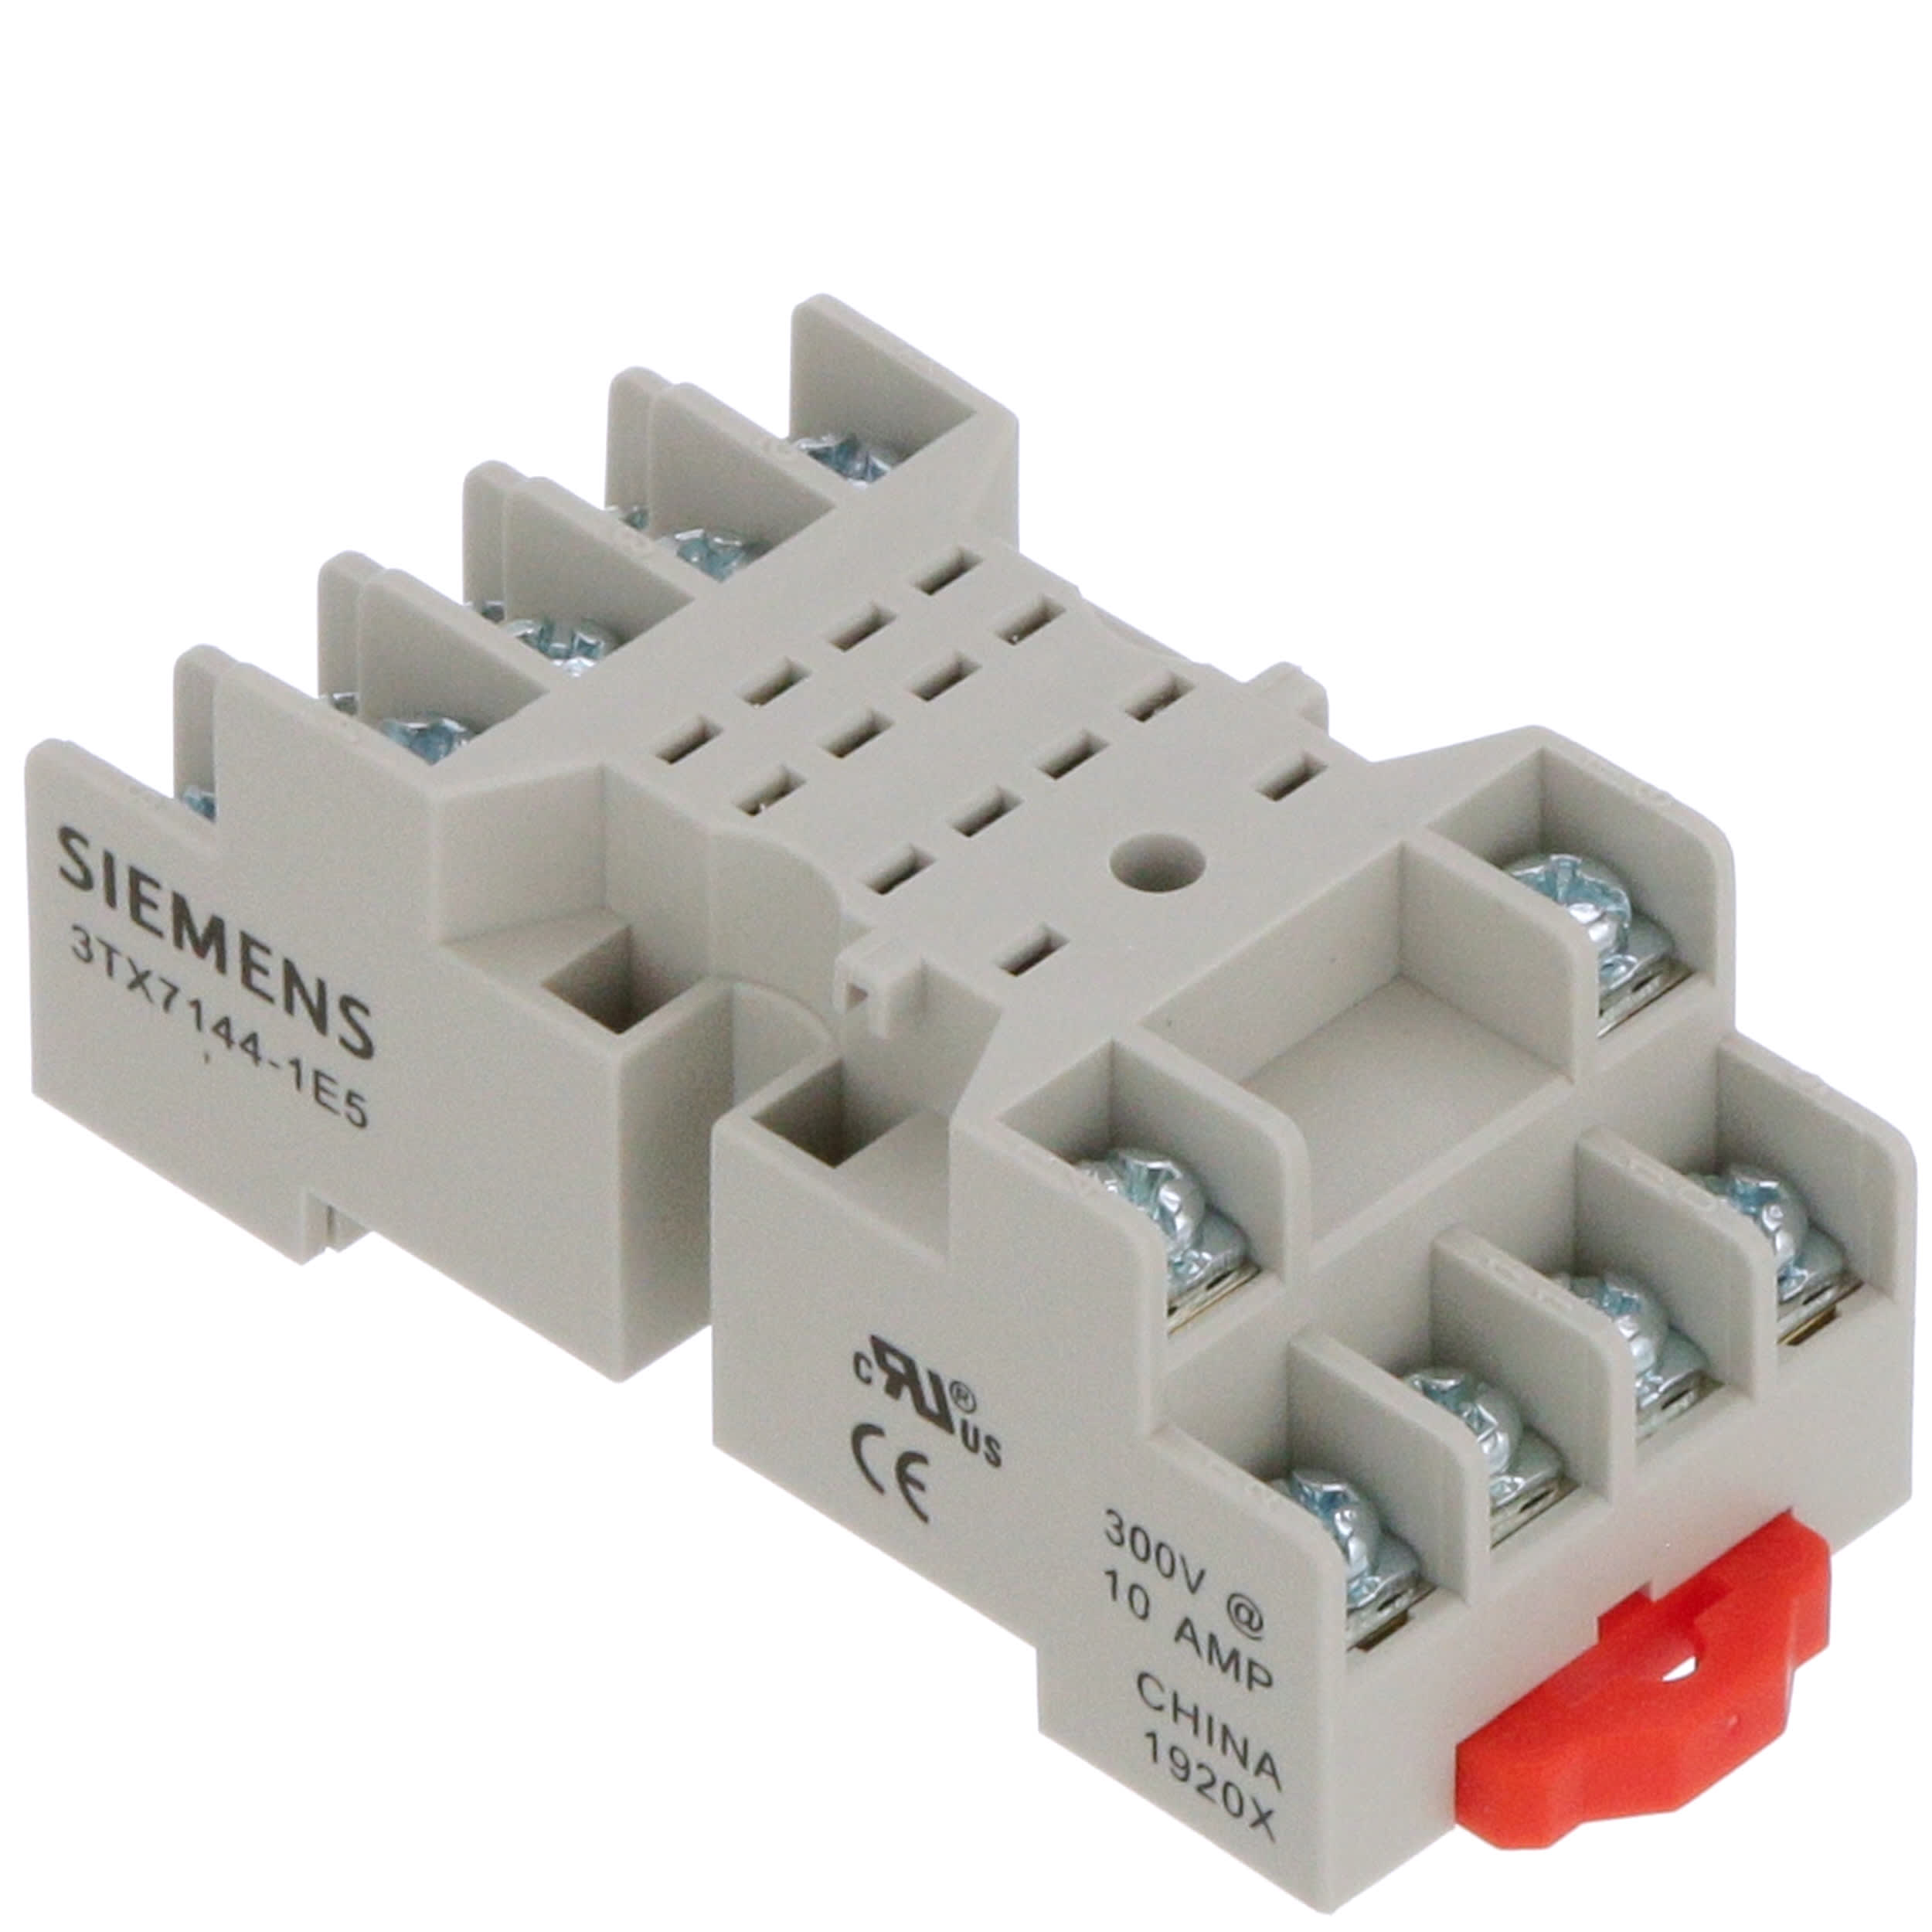 Details about   New Siemens 3TX7144-1E4 socket 15 amp 11 pin square